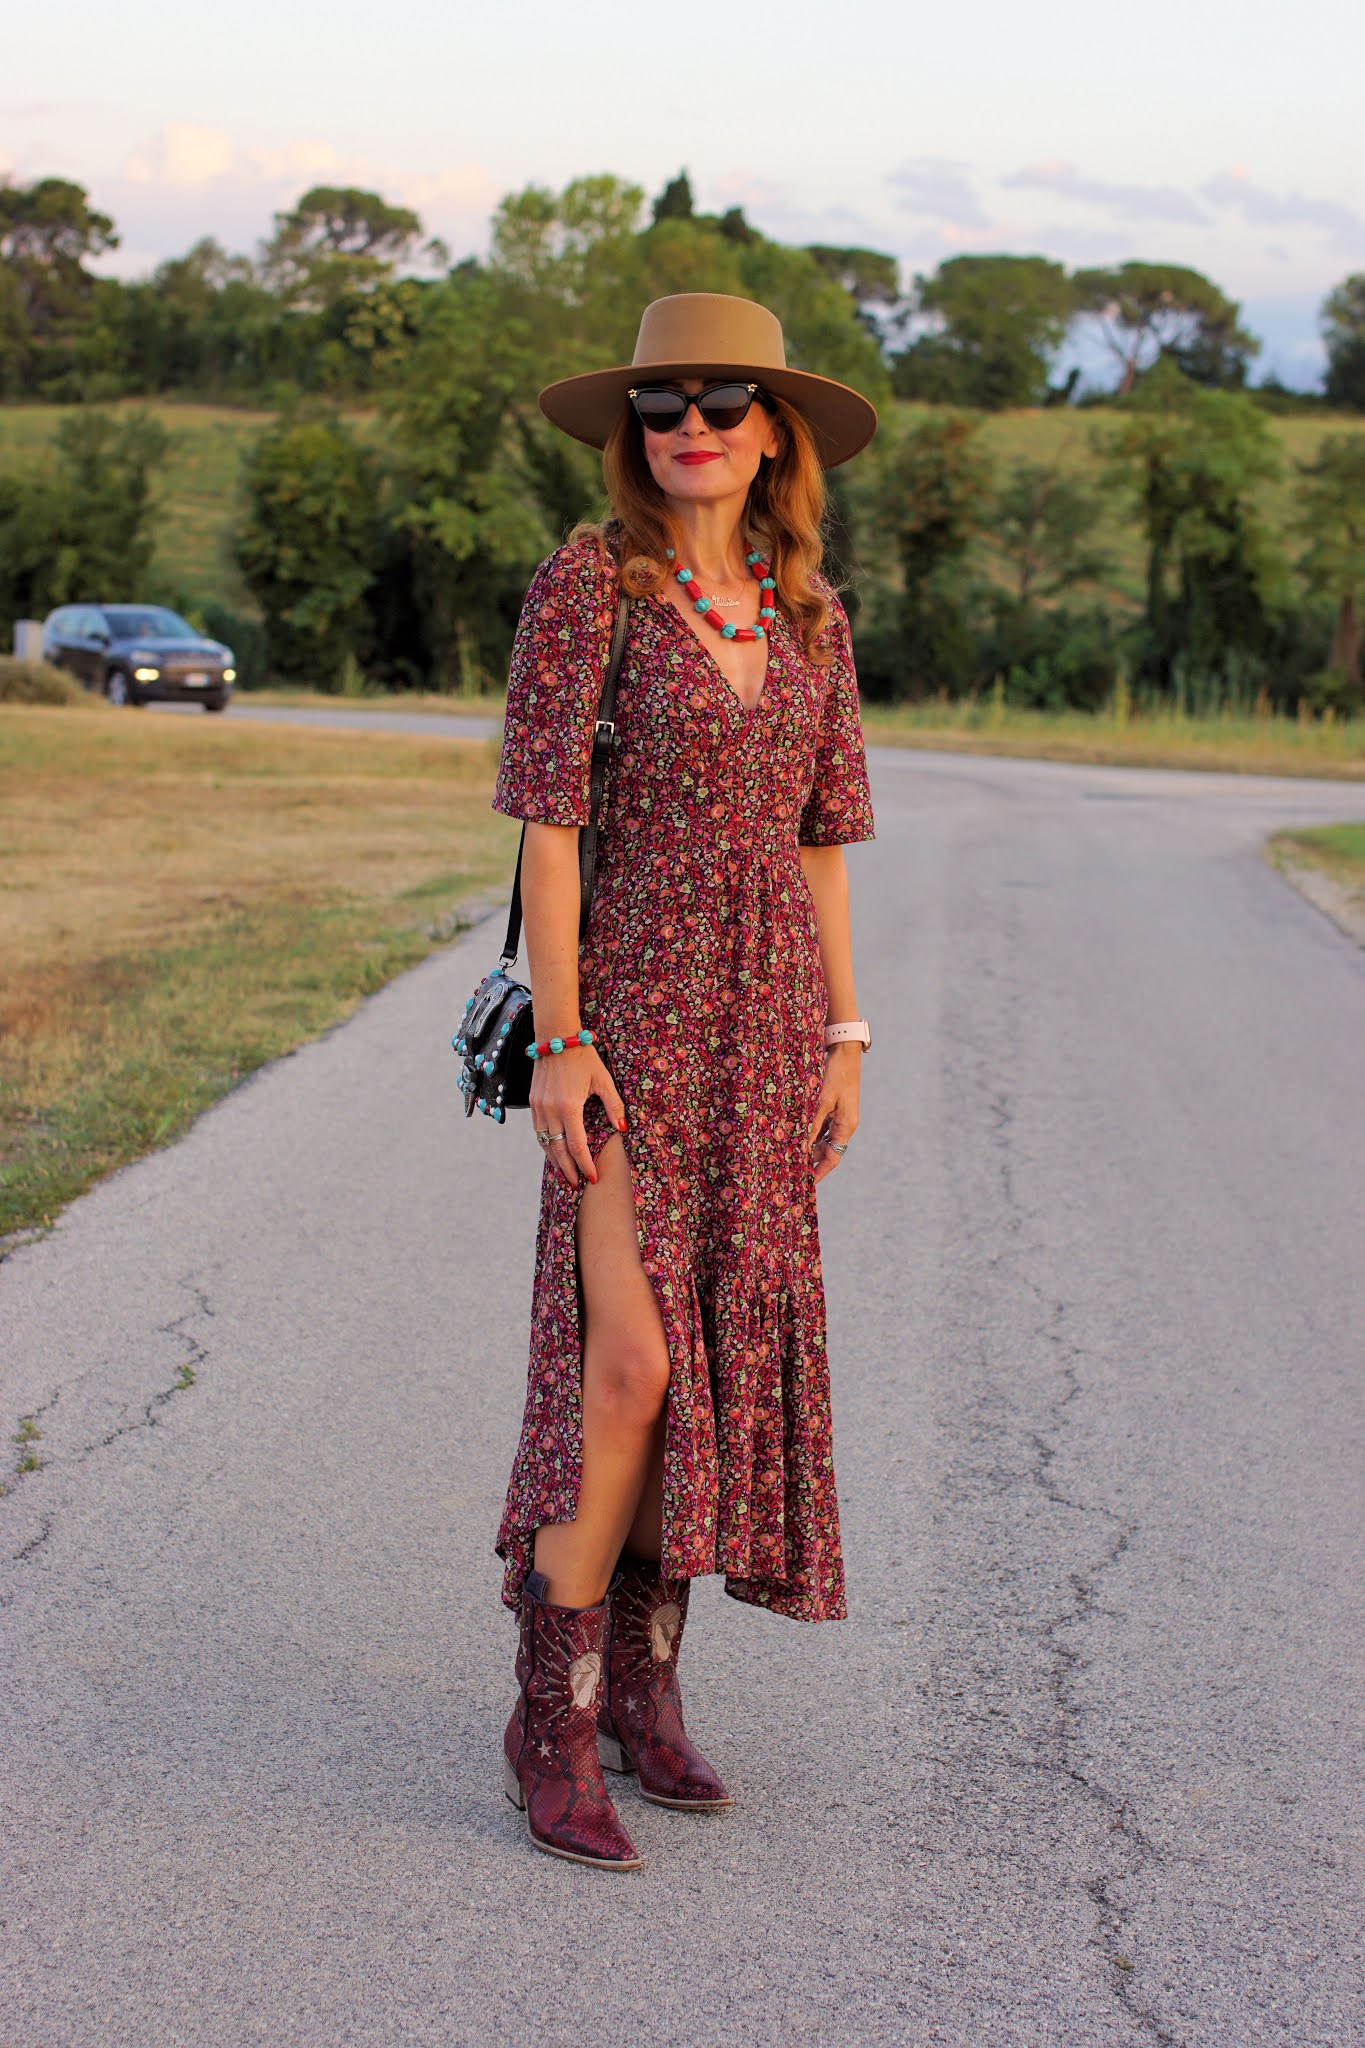 A transitional western style outfit with a ba&sh Paris dress and Lack of Color hat